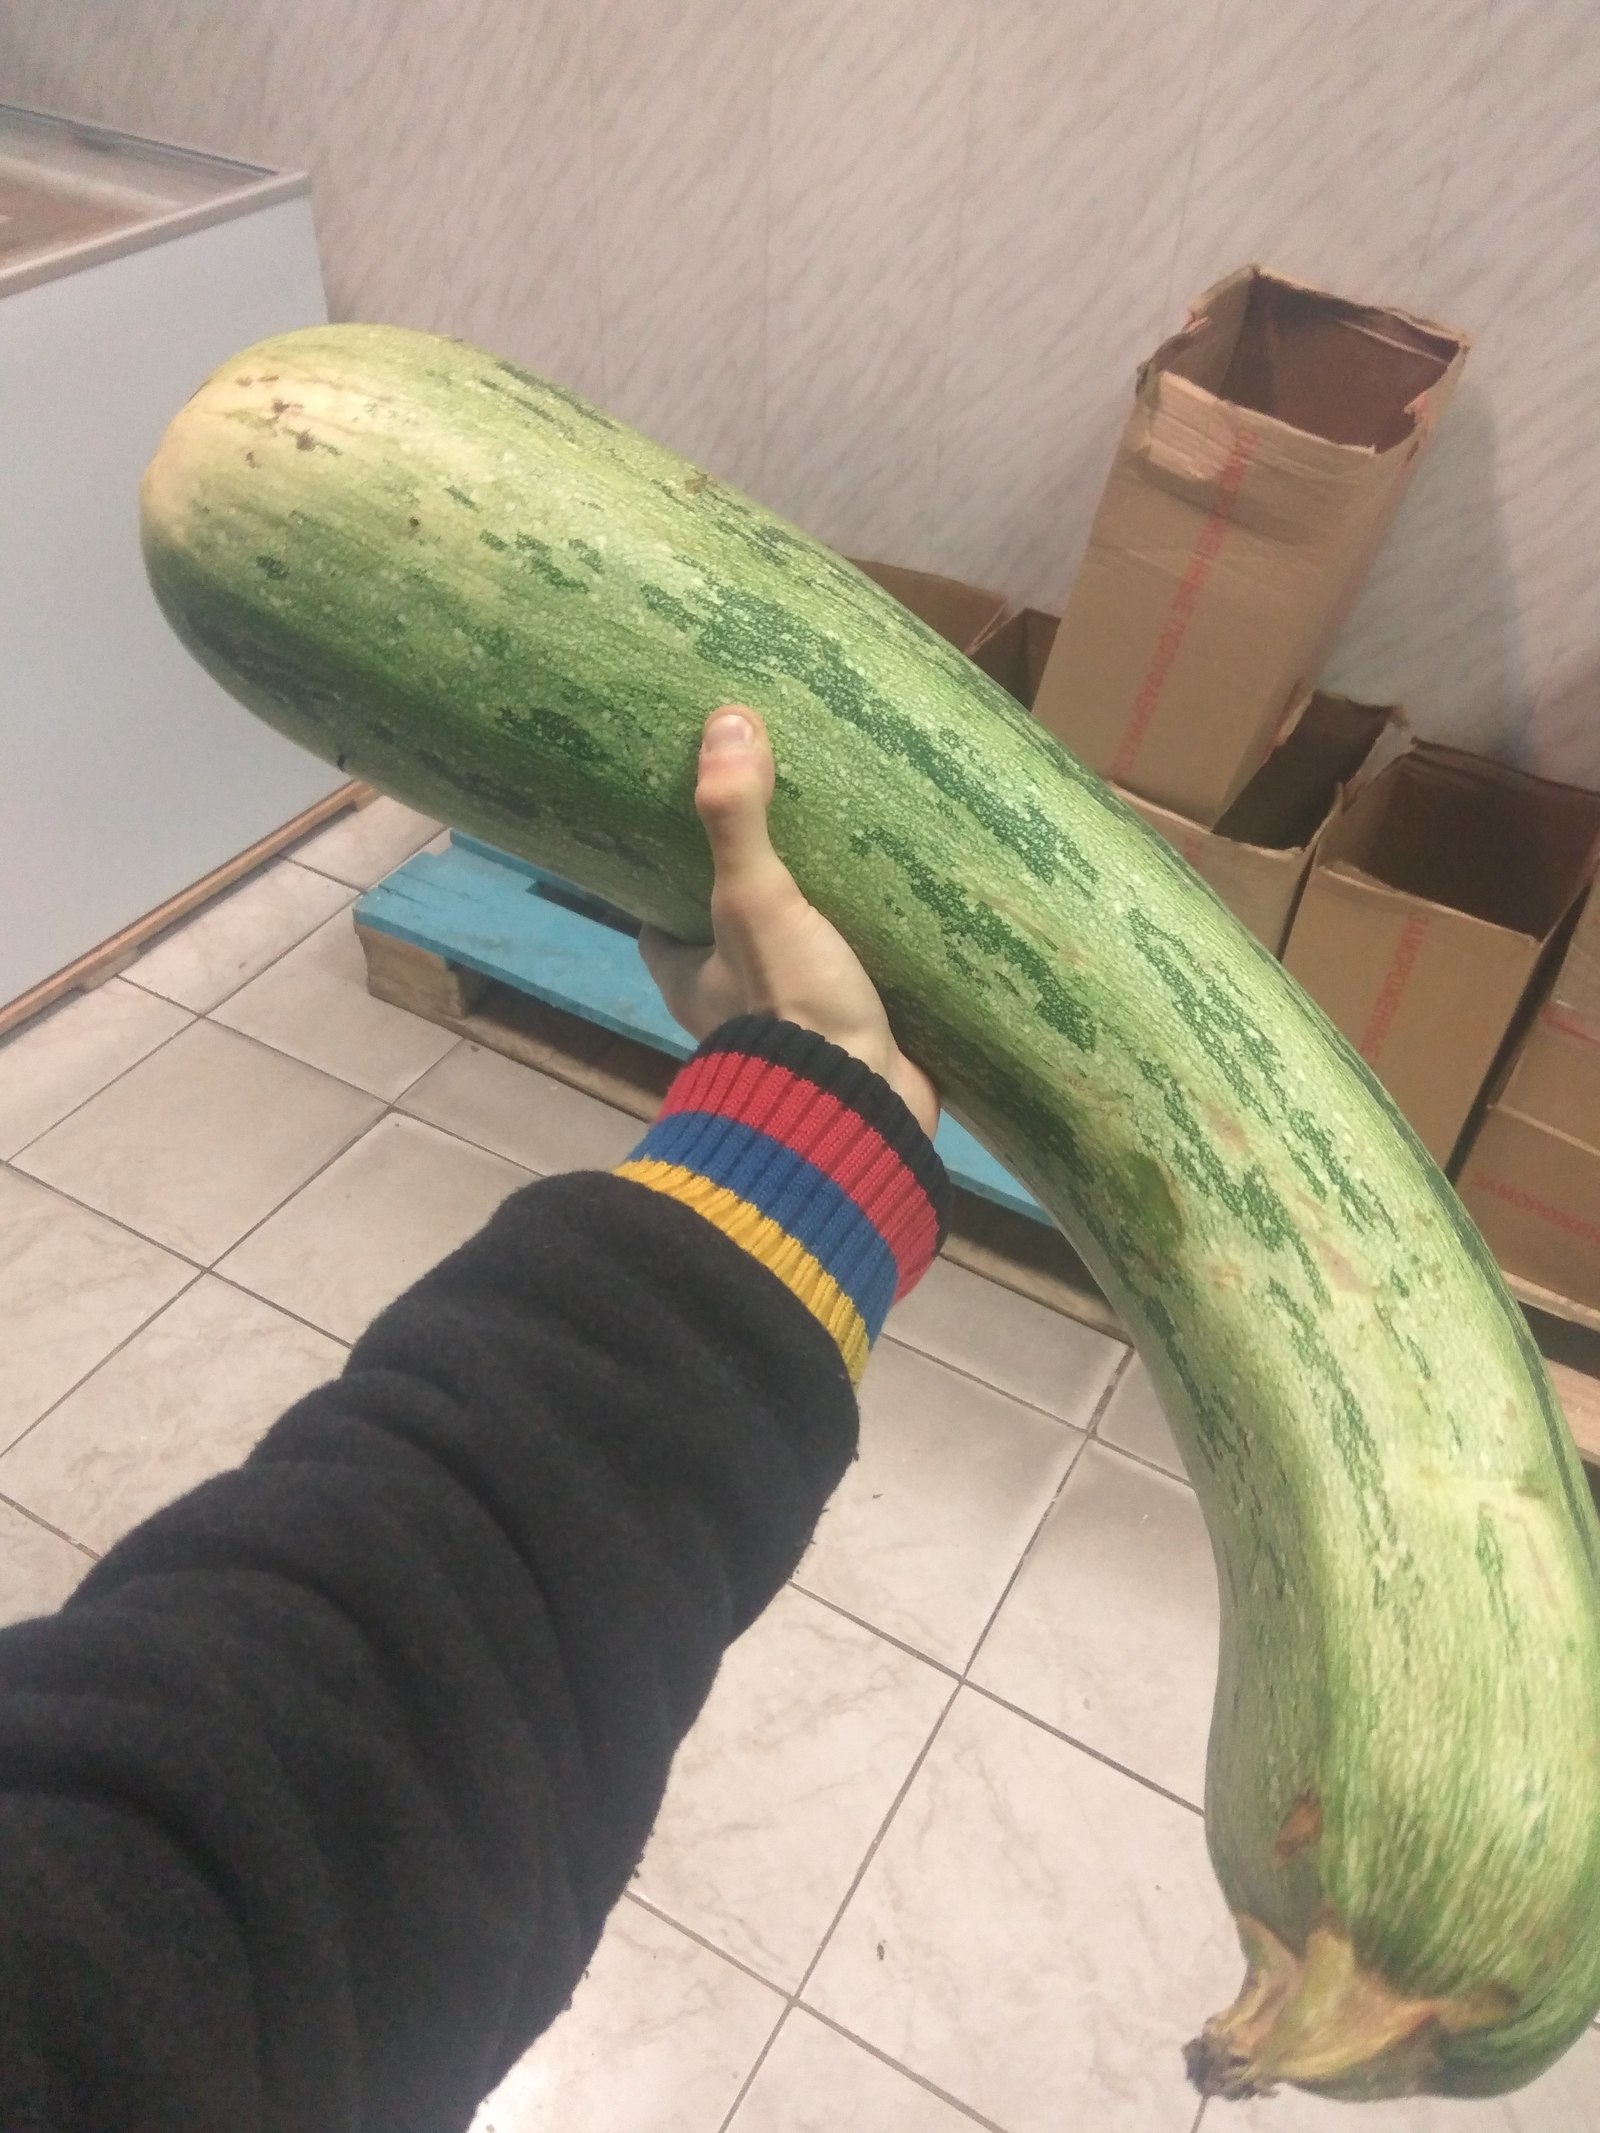 Here is a zucchini - Overgrowth, Mutant, Vegetables, My